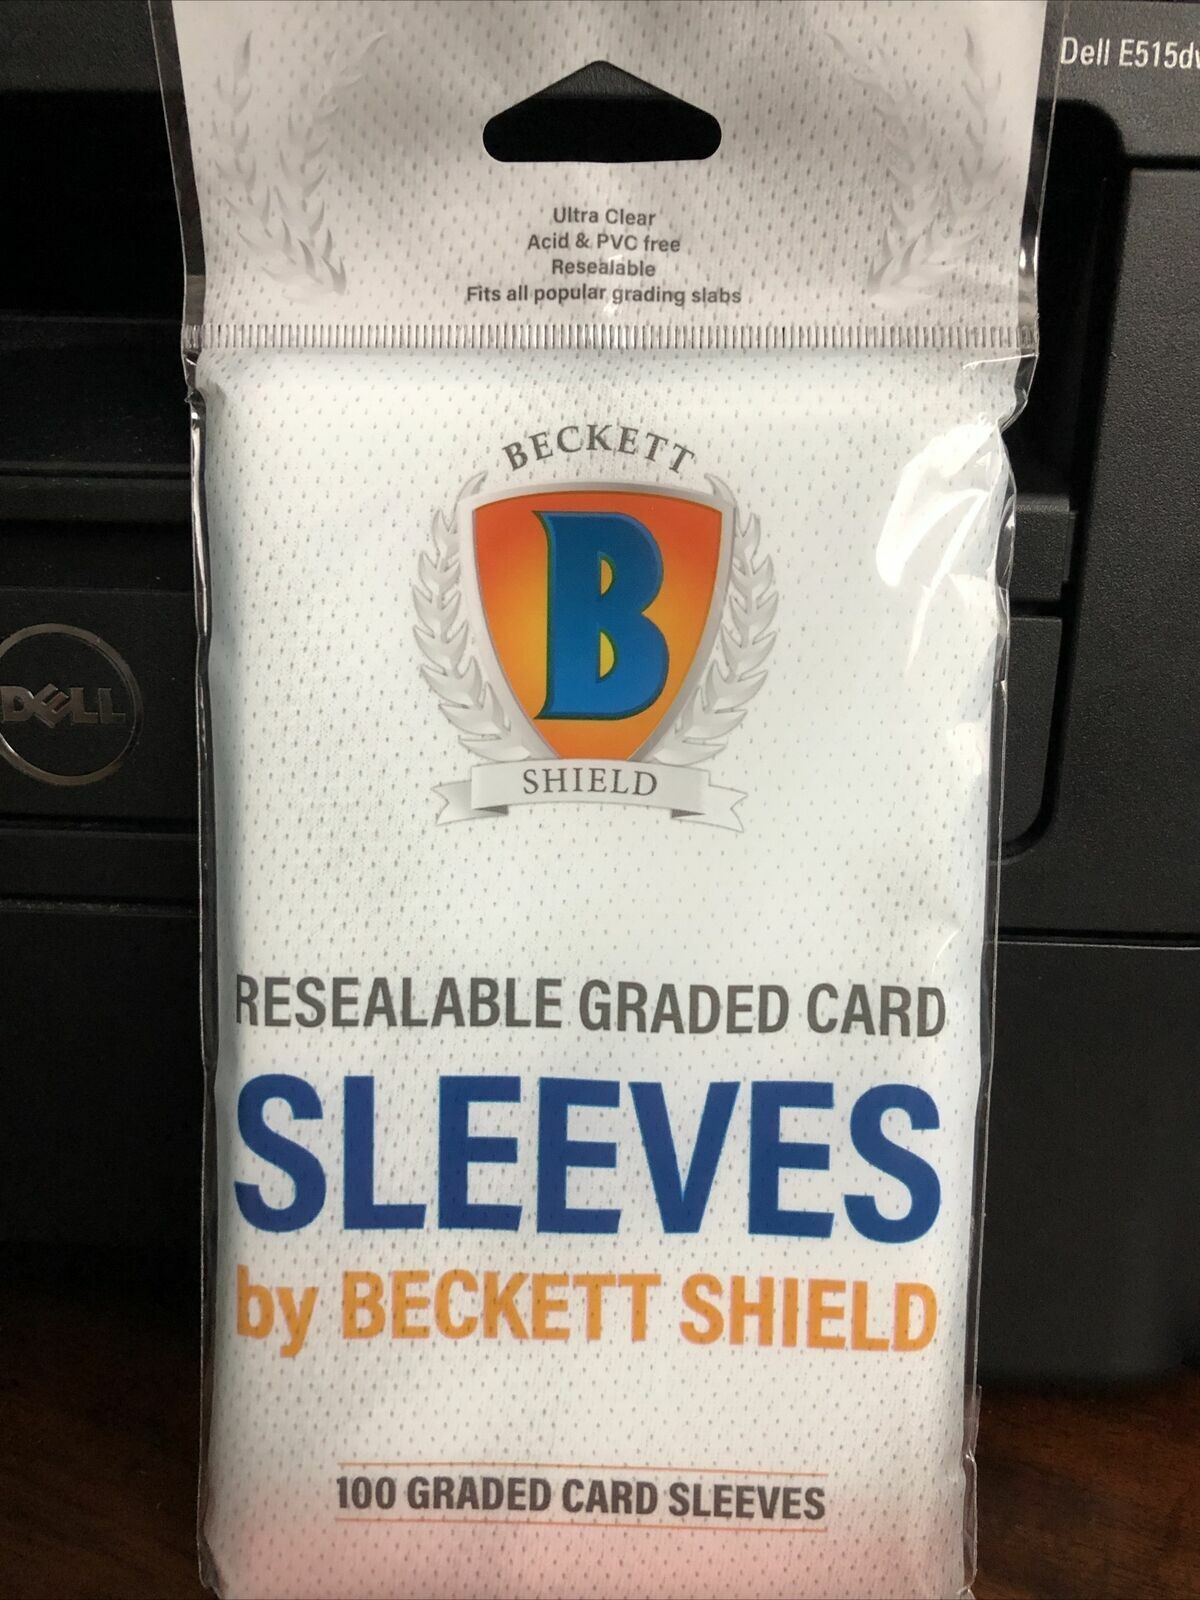 Beckett Shield Resealable Graded Card Sleeves Pack of 100 YOU CHOOSE QUANTITY